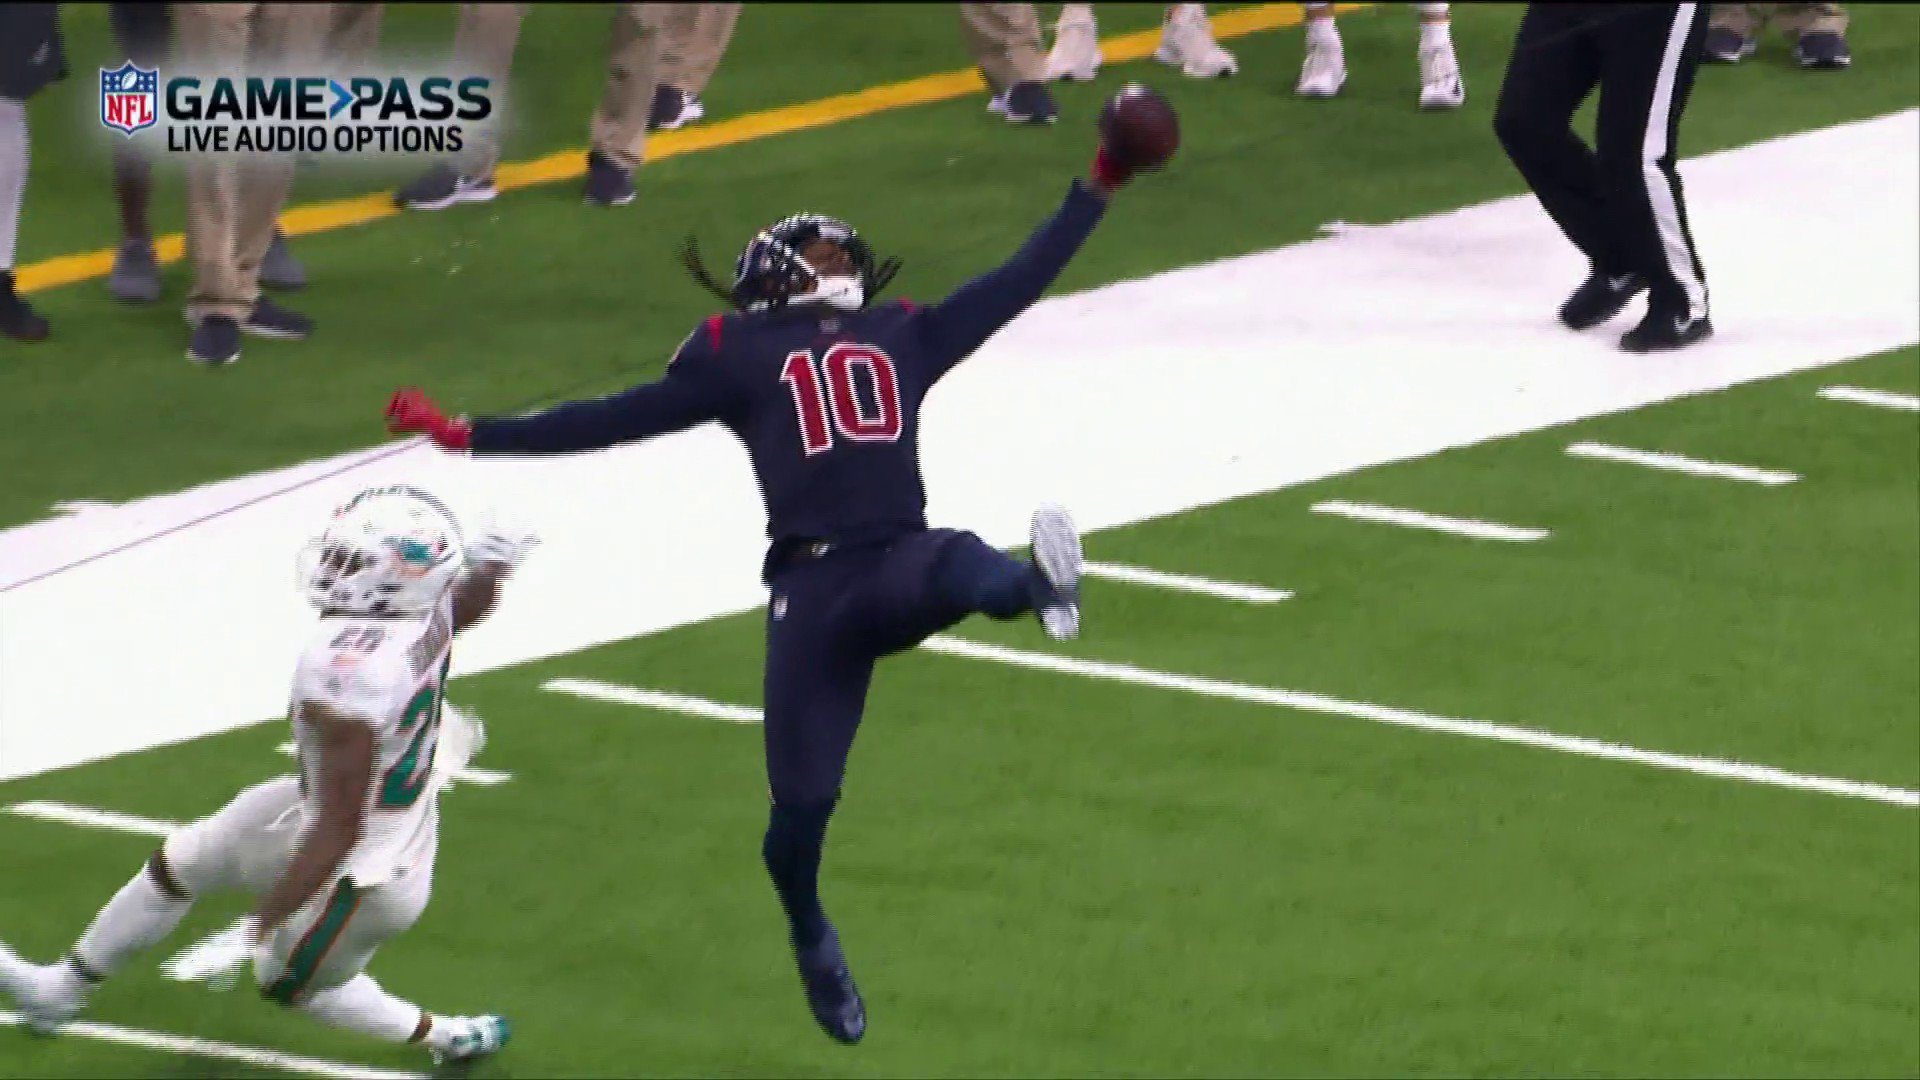 Sunday Night Football on NBC on X: 'DeAndre Hopkins had a perfect 2018  season - ZERO DROPS. Even his catches that didn't count were incredible!  And now you can study his brilliance